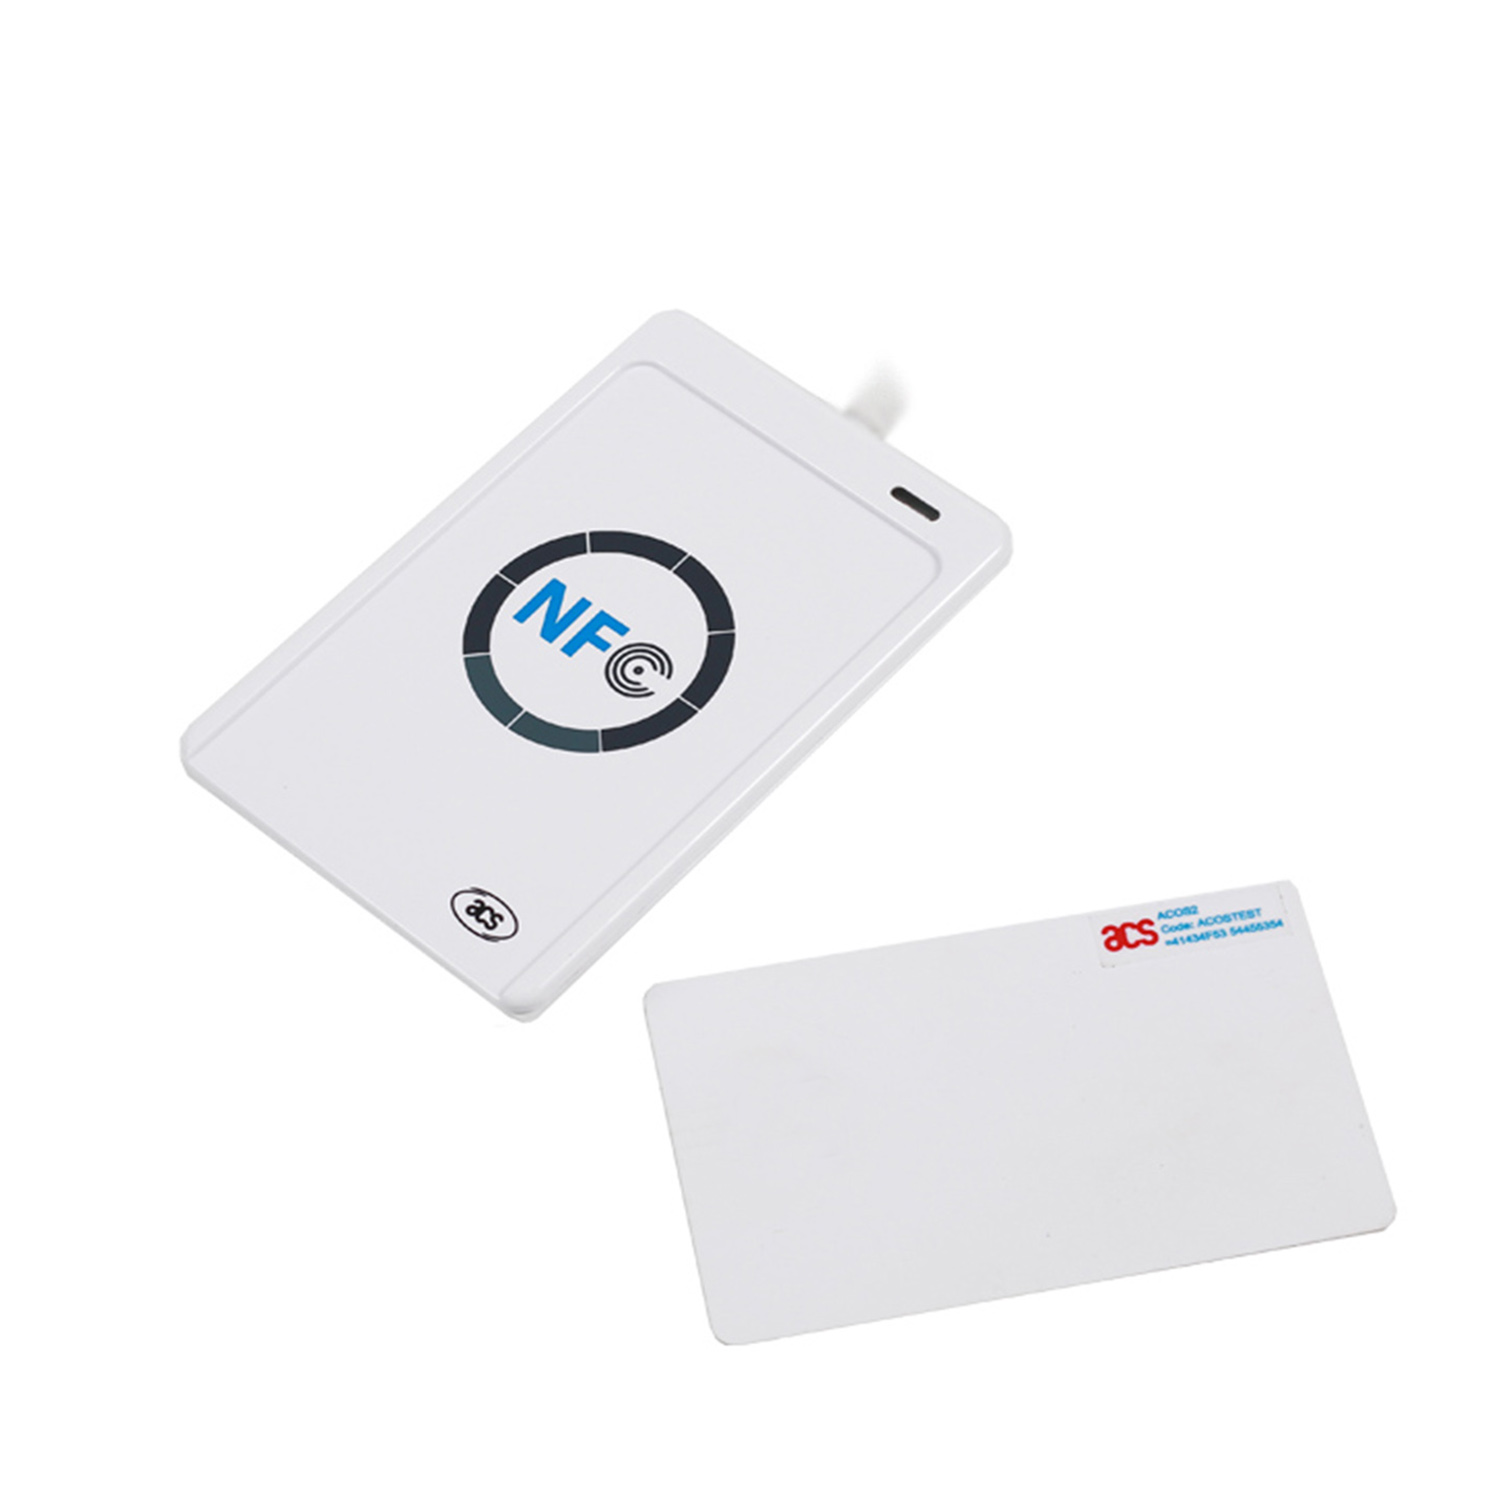 Best ACS IS014443 USB NFC Tags Smart Card Reader for Access Control ACR122U